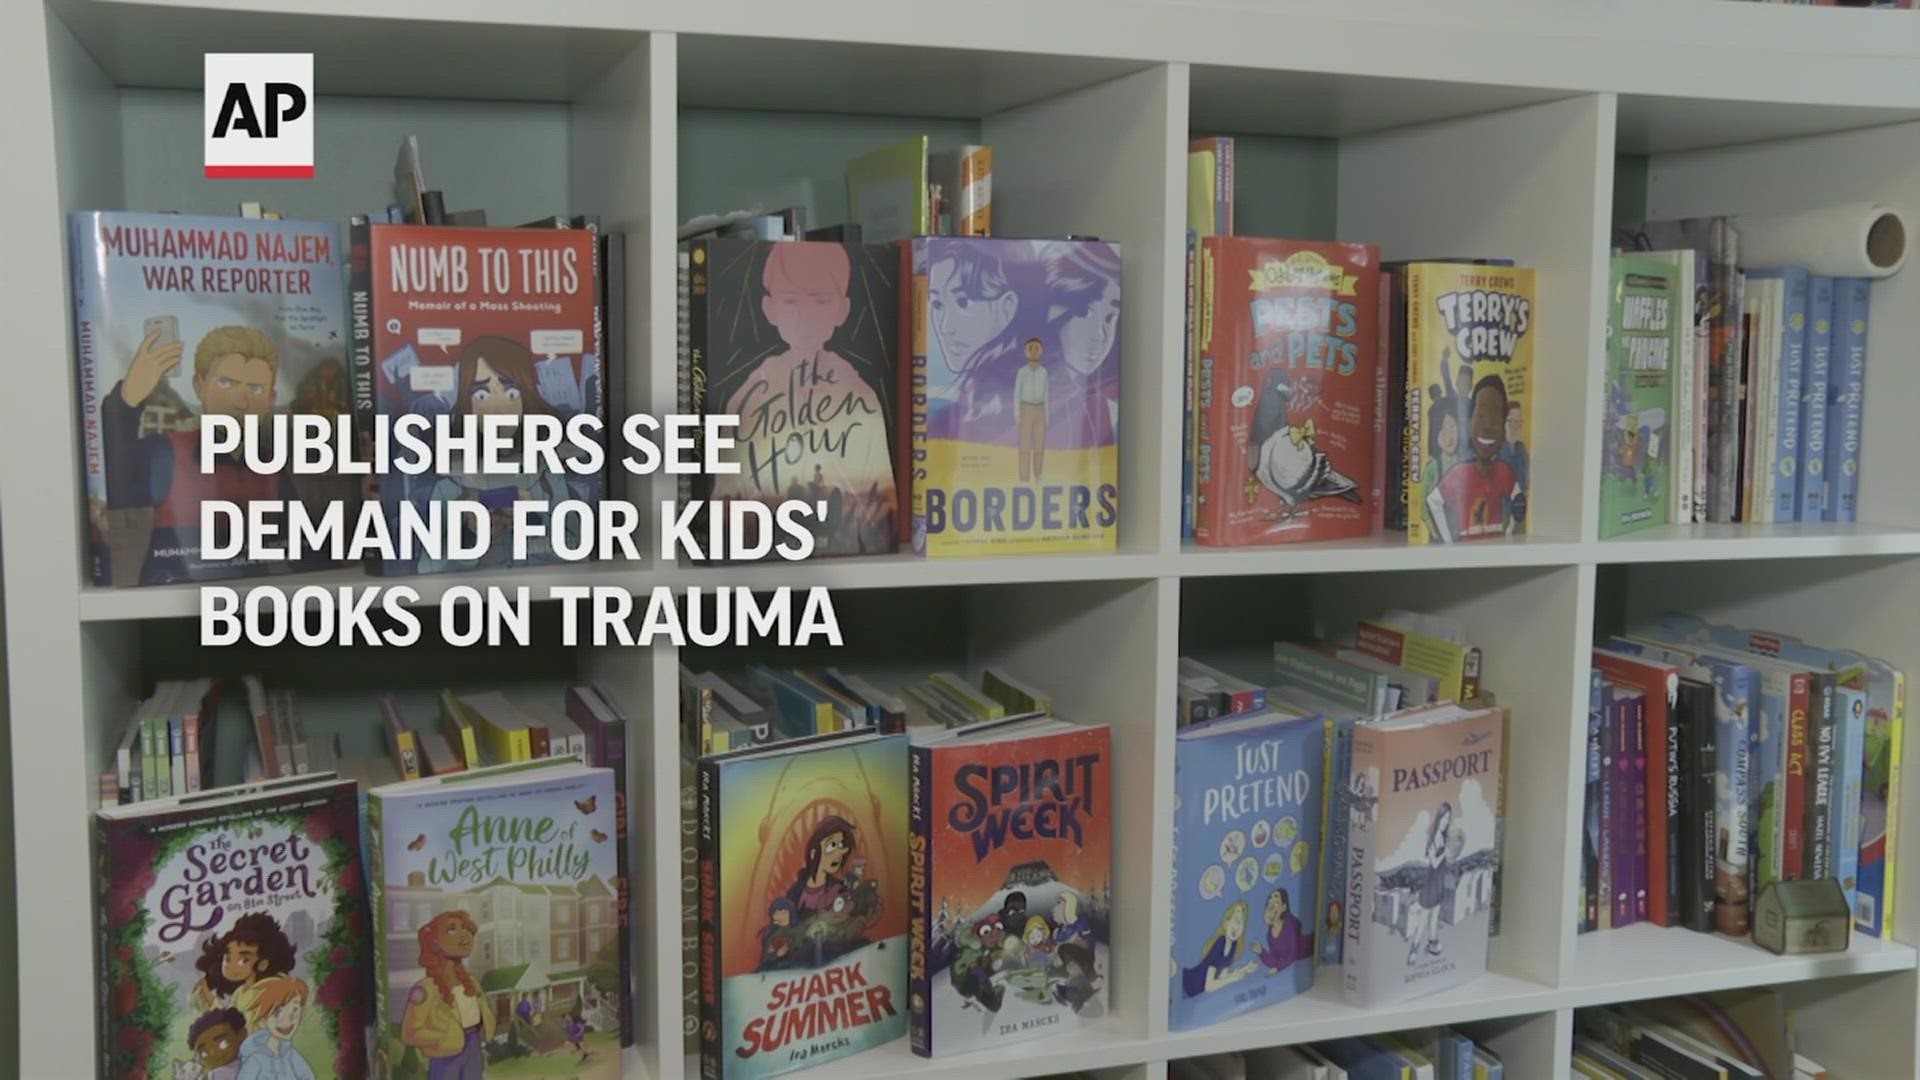 Demand for picture books explaining traumatic events such as school shootings has grown dramatically, according to publishers. Credit: AP